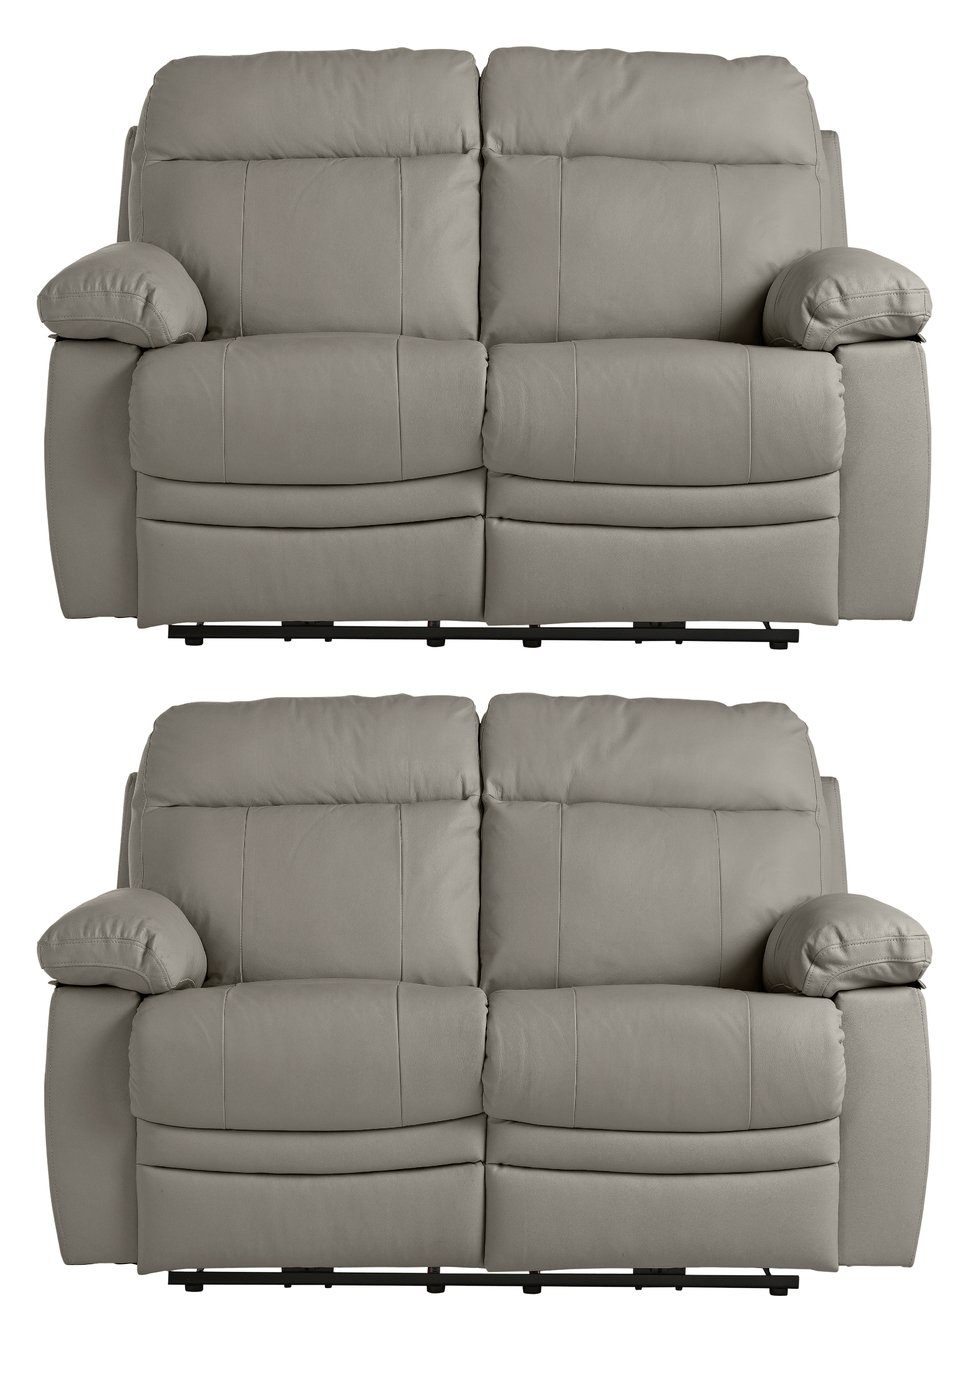 Argos Home Paolo Pair of 2 Seater Manual Recliner Sofa -Grey